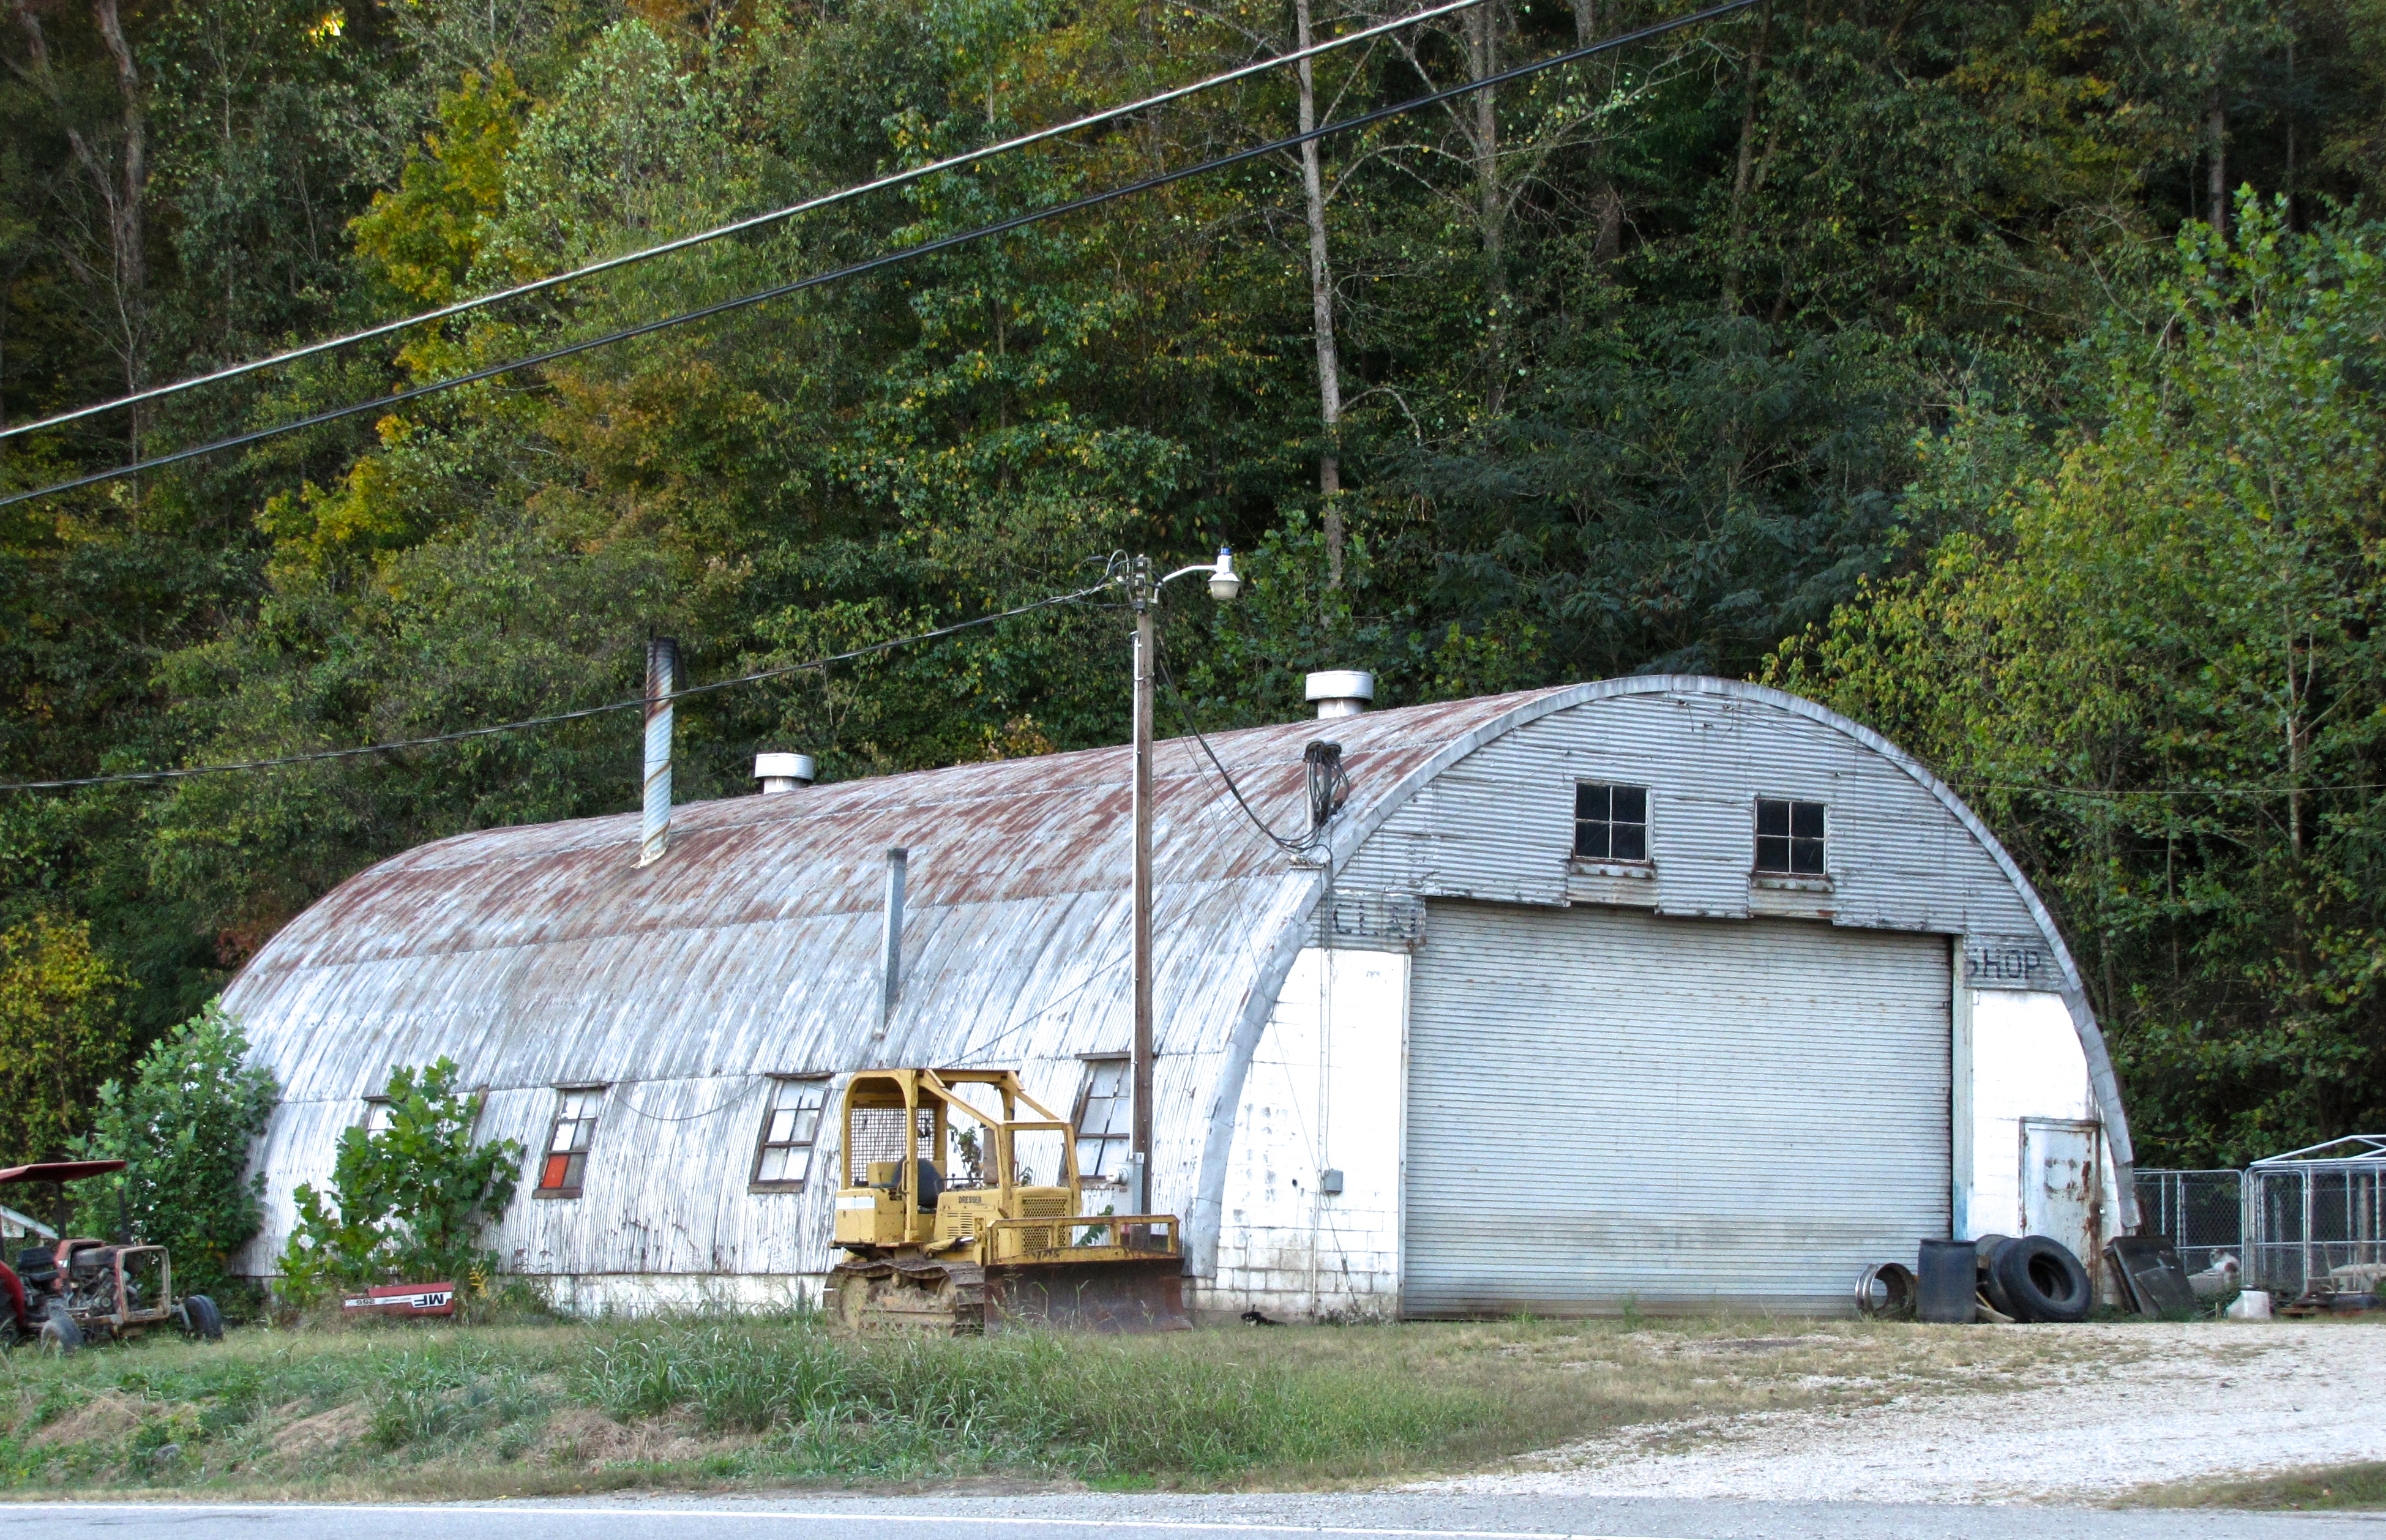 quonset hut in Jacksonville, NC